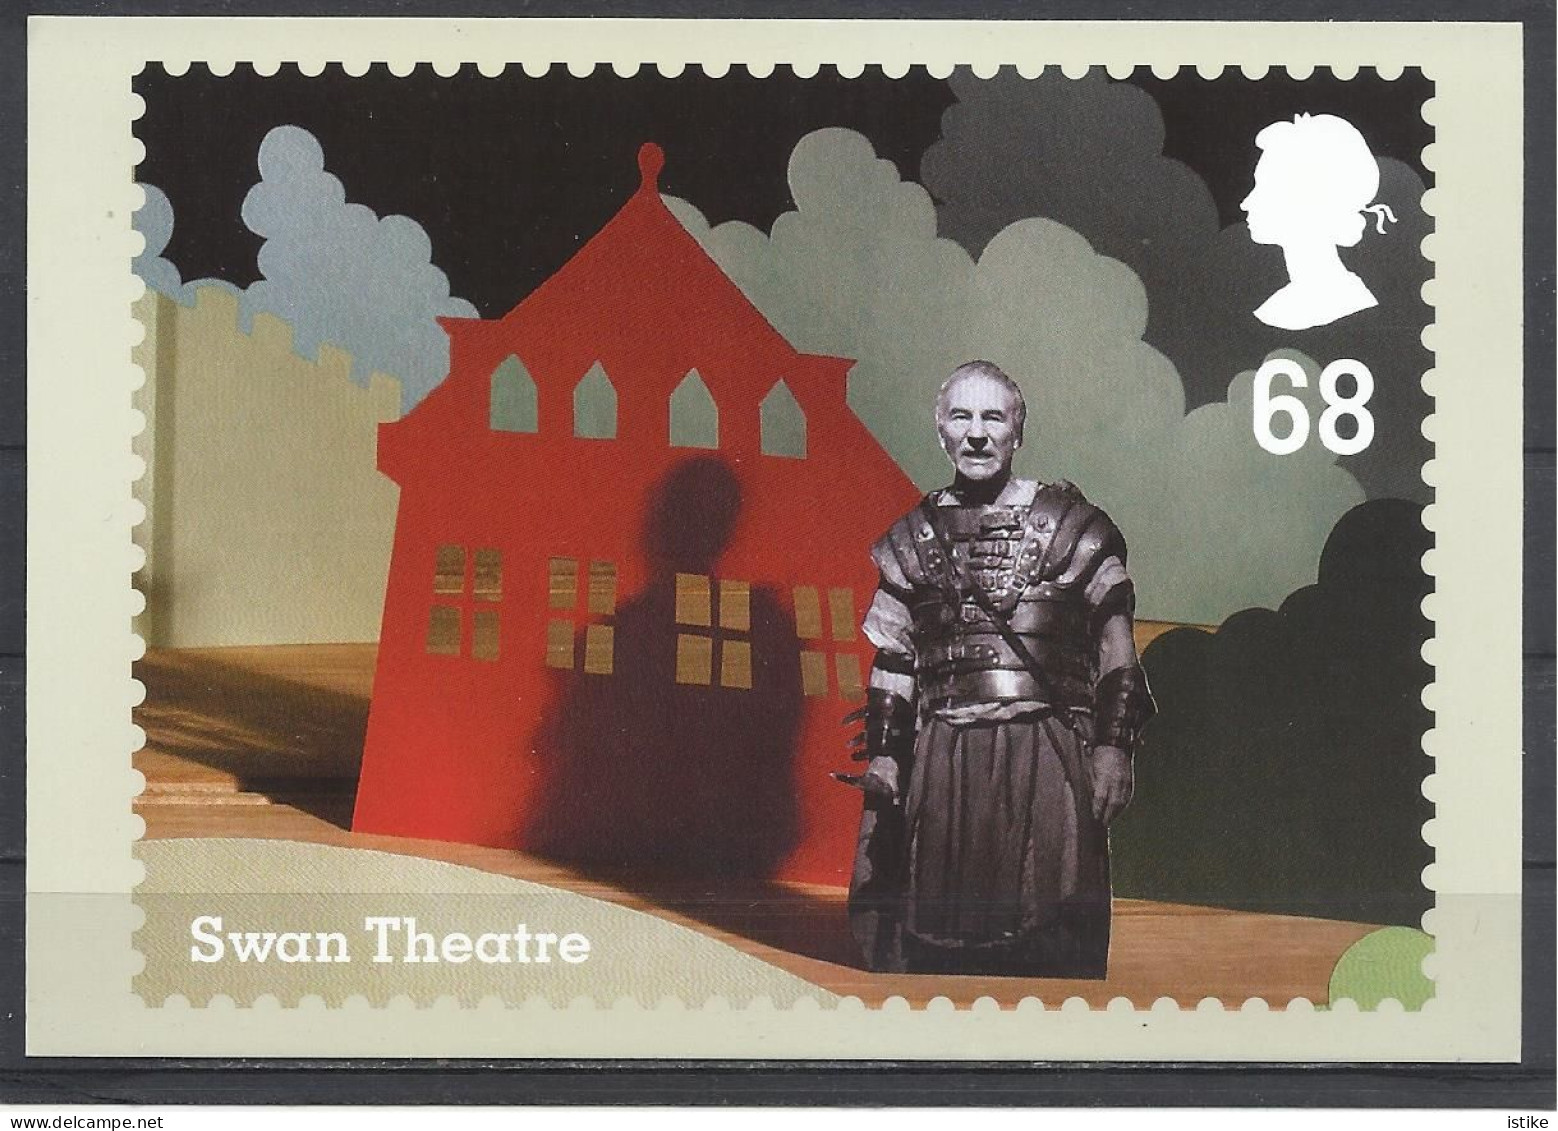 U.K., Royal Shakespeare Company, (Swan Theatre), Antony And Cleopatra-Patrick Stewart, 2011. - Stamps (pictures)